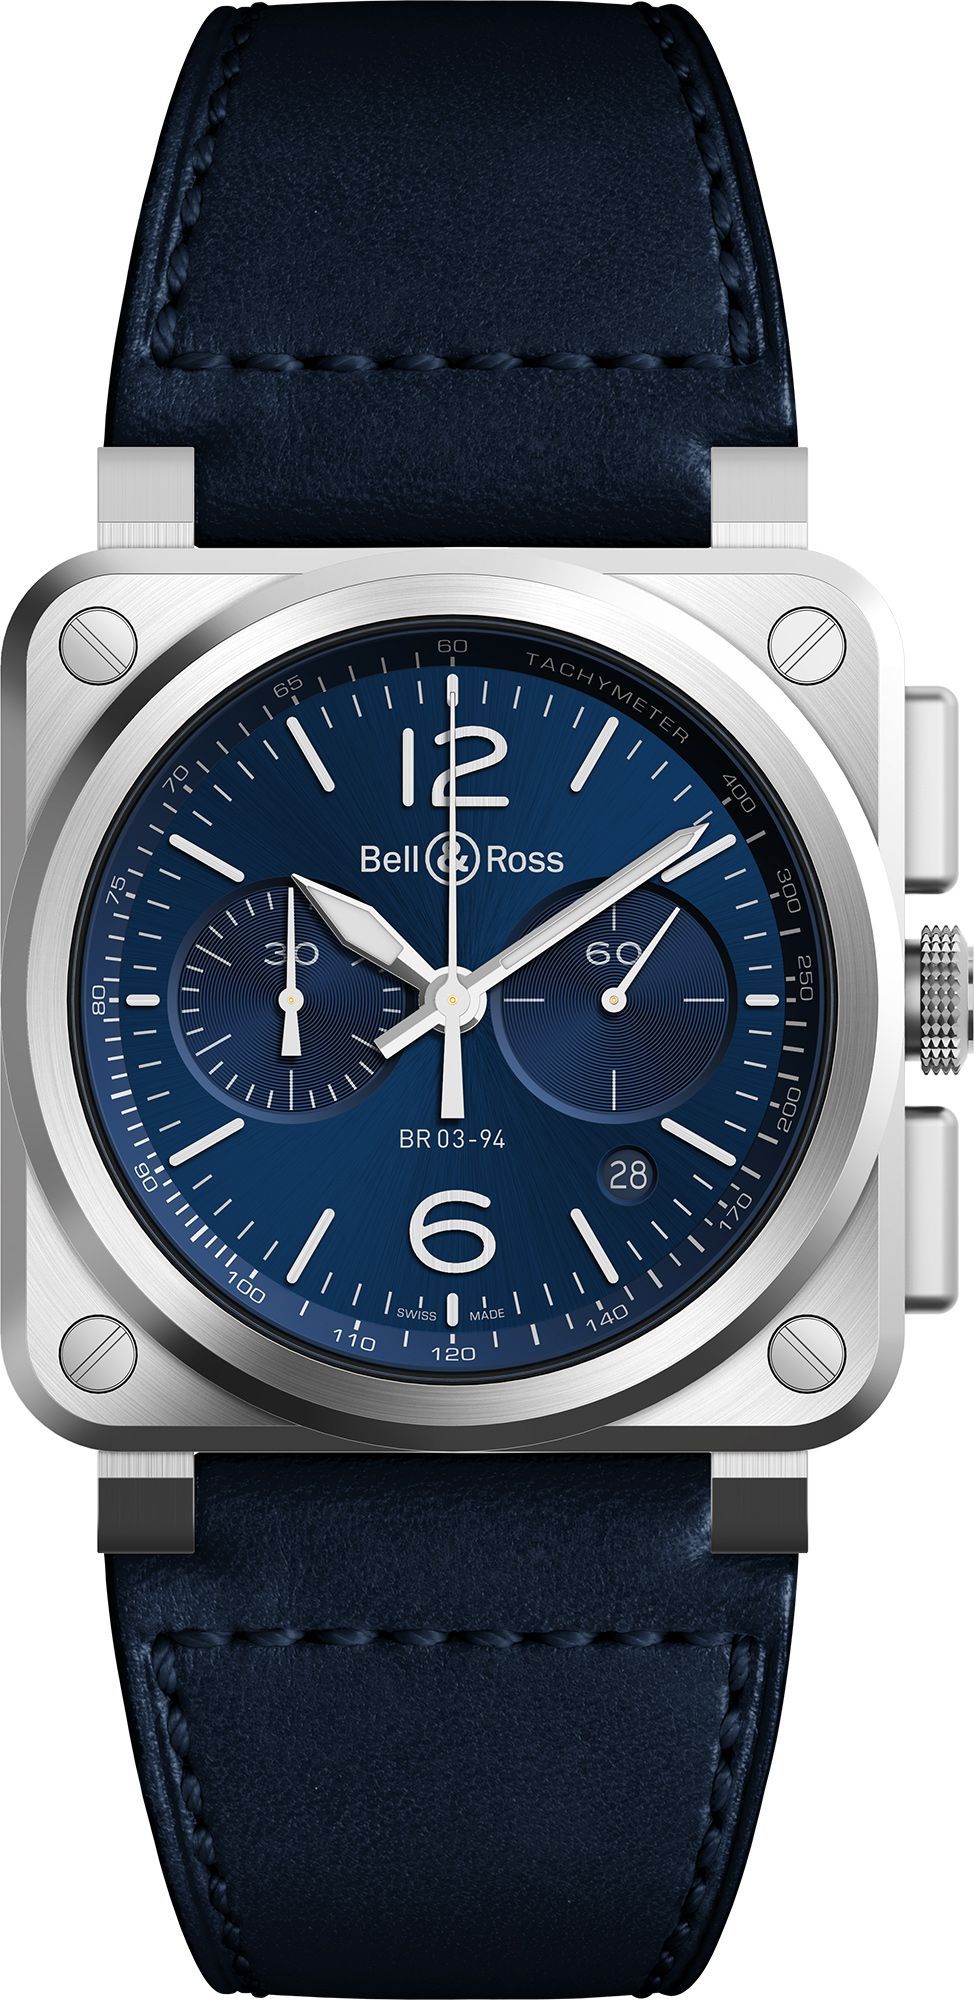 Bell & Ross Instruments BR 03 Chrono Blue Dial 42 mm Automatic Watch For Men - 1